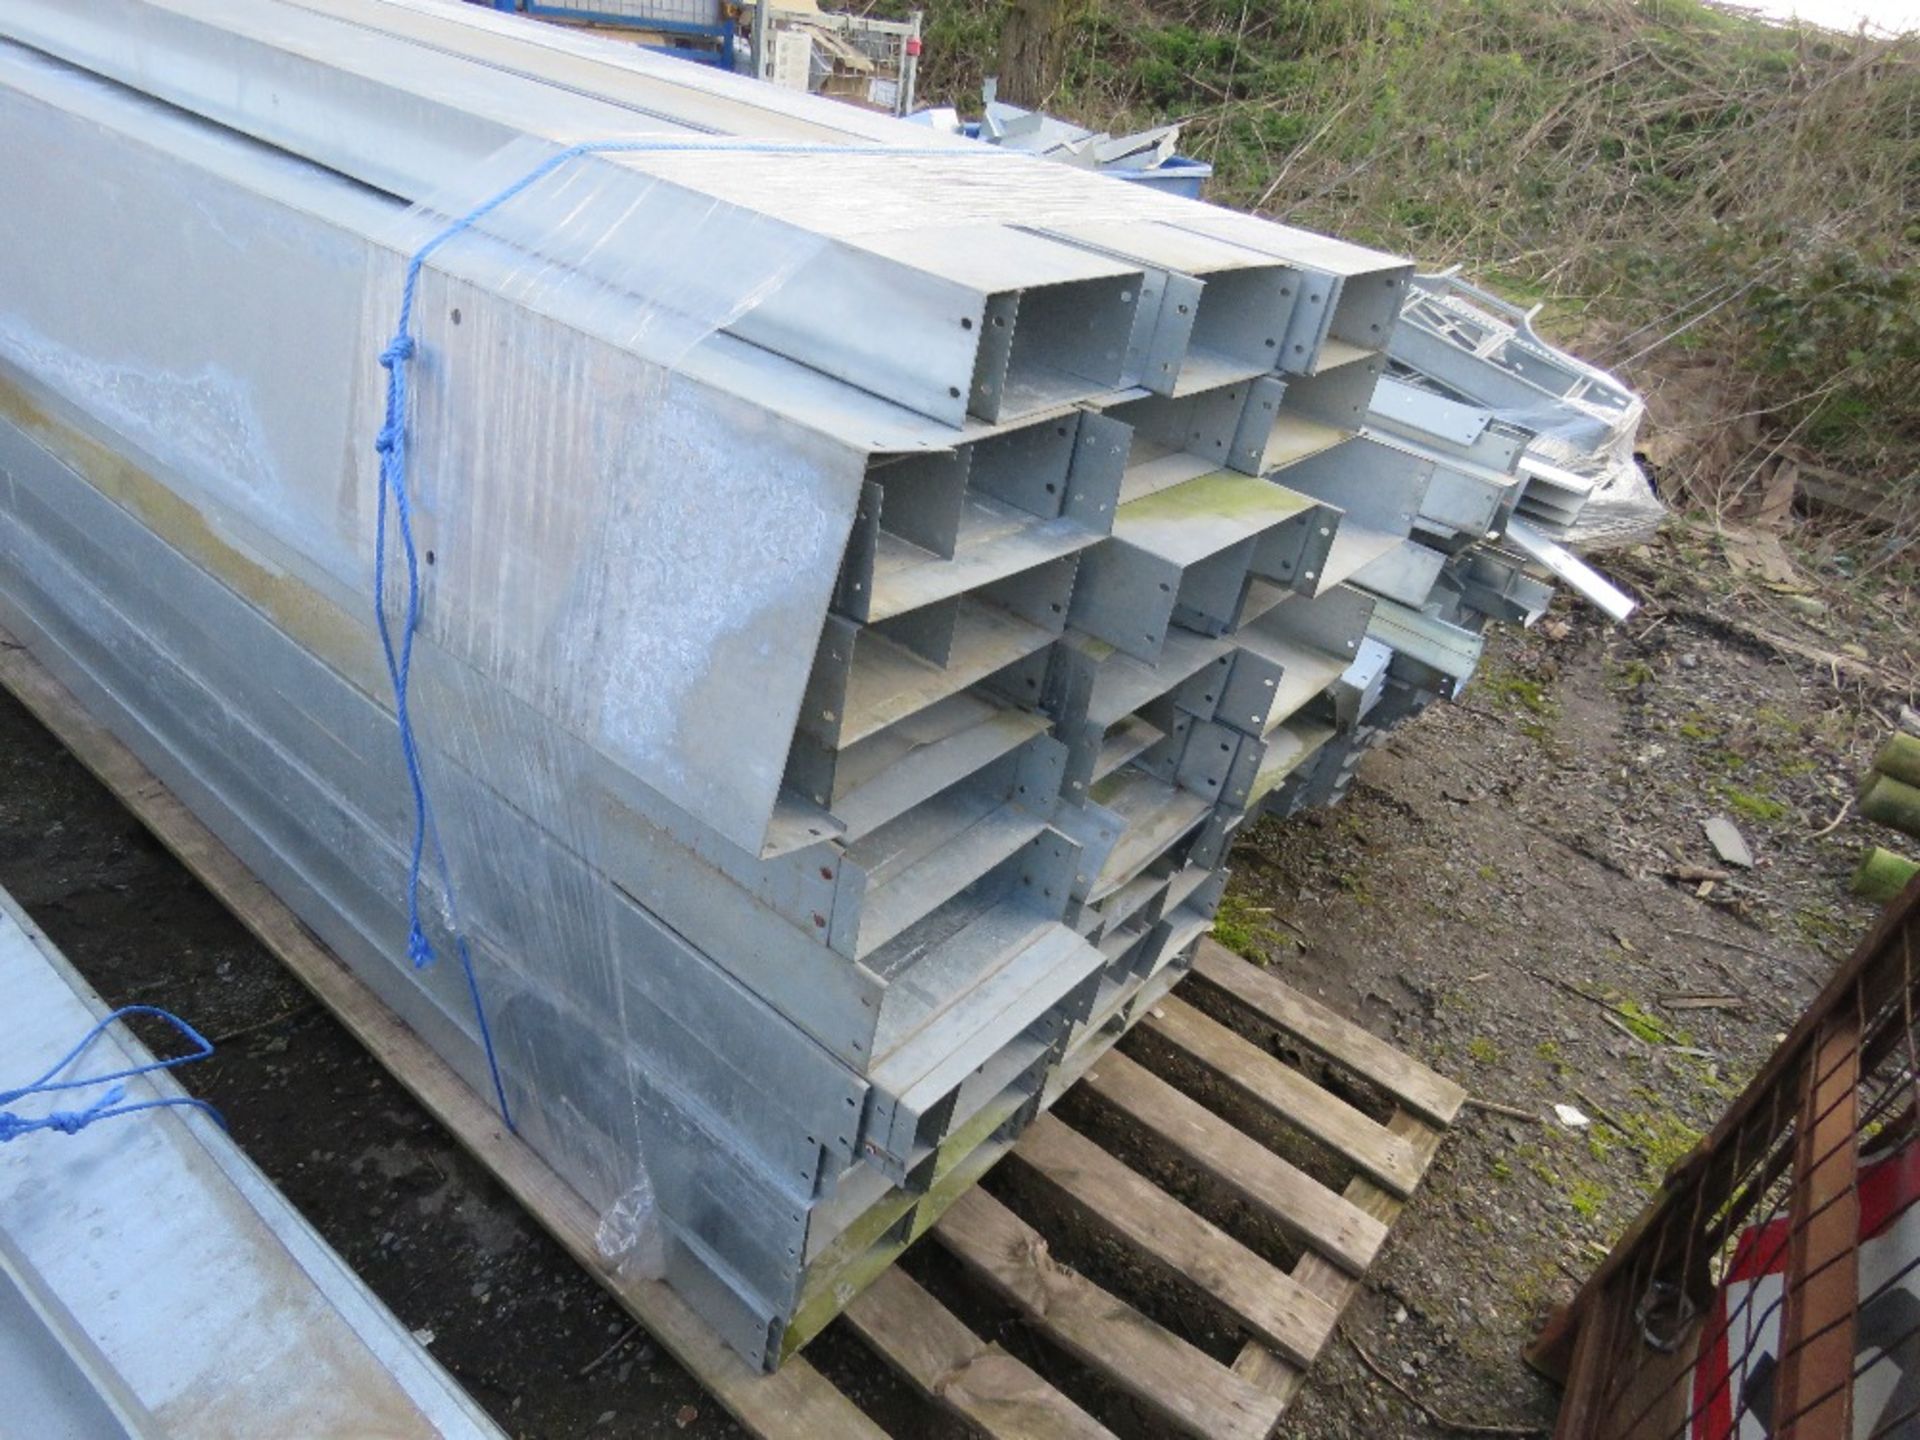 LARGE QUANTITY OF METAL DUCTING PARTS INCLUDING DUCTS AT 9FT LENGTH APPROX. SOURCED FROM COMPANY LIQ - Bild 3 aus 9